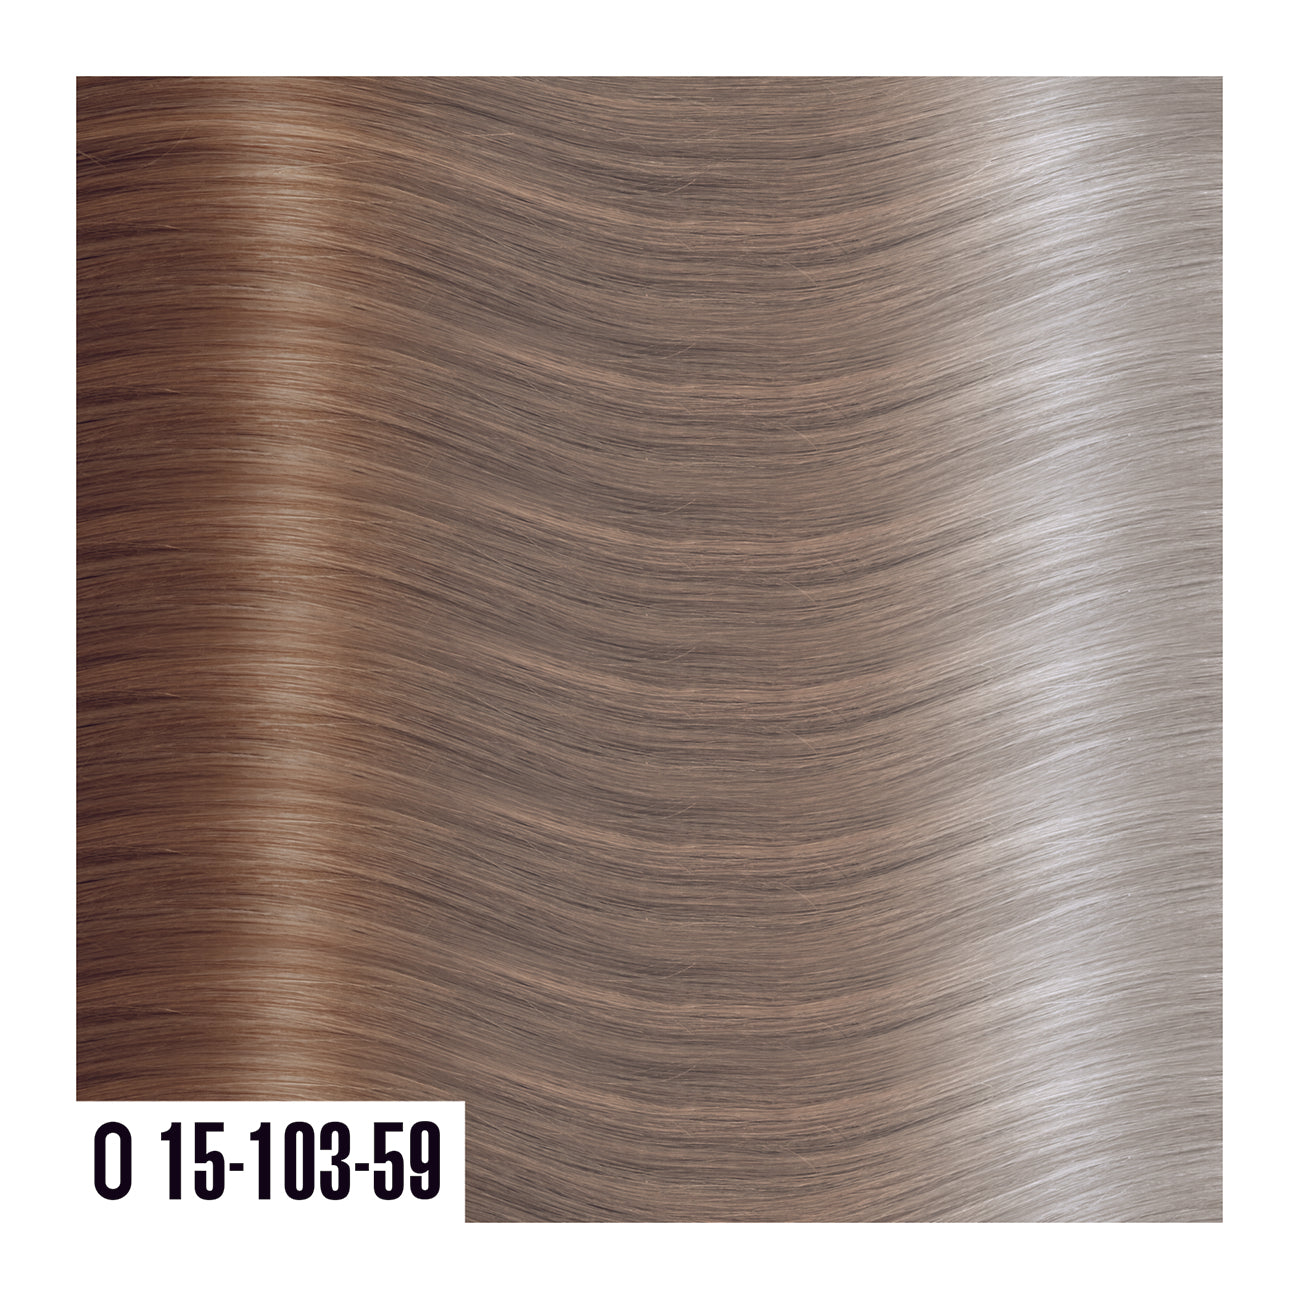 O15-103-59 - Prime Tape In Light brown Fade Into Platinum Blonde - Ombre colors are a beautiful gradual blend of 3 colors with darker roots and lighter ends.  